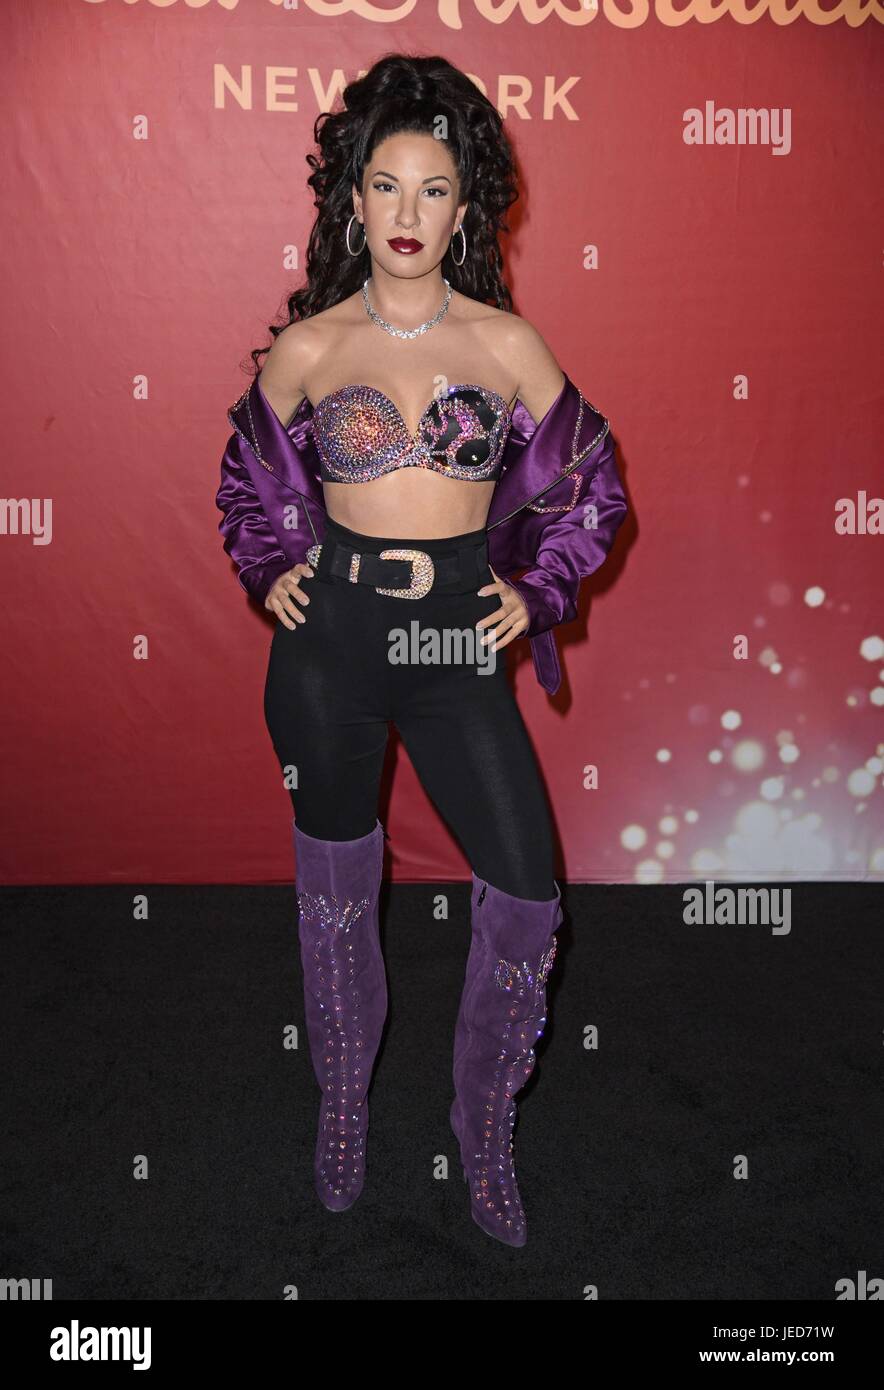 New York, NY, USA. 23rd June, 2017. Selena Quintanilla in attendance for Madame Tussauds New York Unveils Selena Quintanilla's Wax Figure to Launch, Madame Tussauds, New York, NY June 23, 2017. Credit: Derek Storm/Everett Collection/Alamy Live News Stock Photo